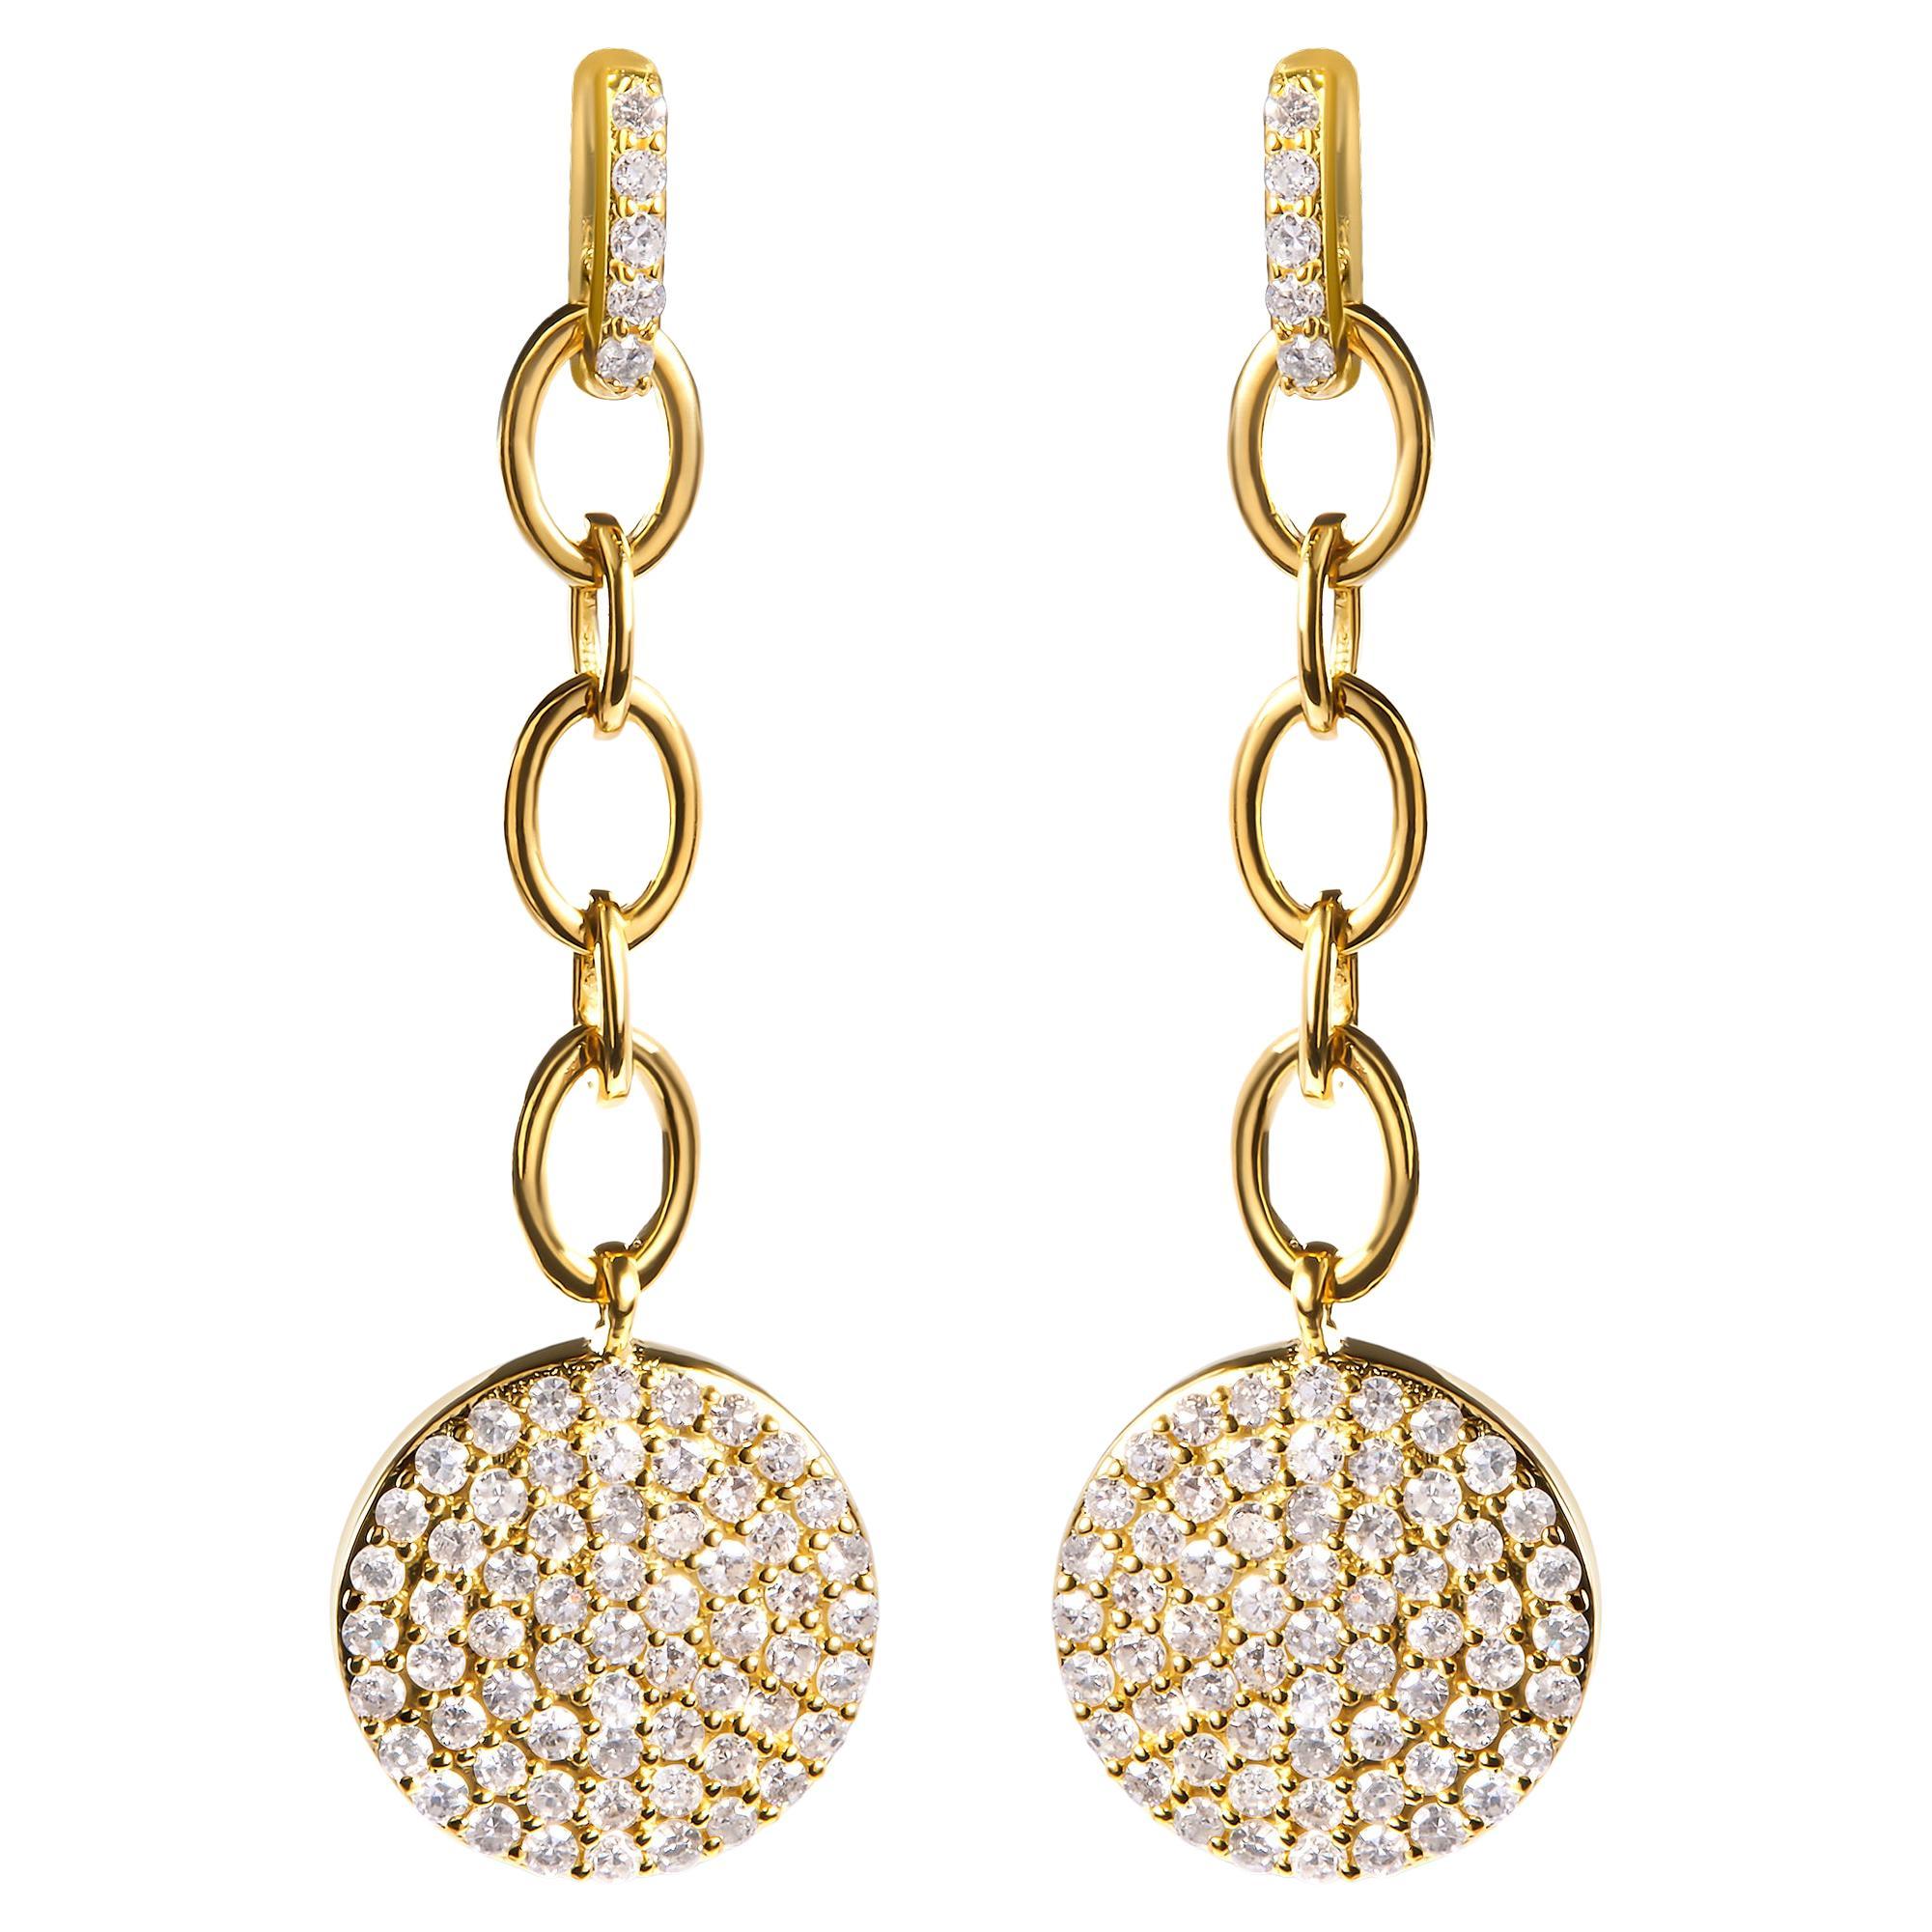 18K Yellow Gold Plated Sterling Silver 1.0 Carat Diamond Dangle Chain Earrings